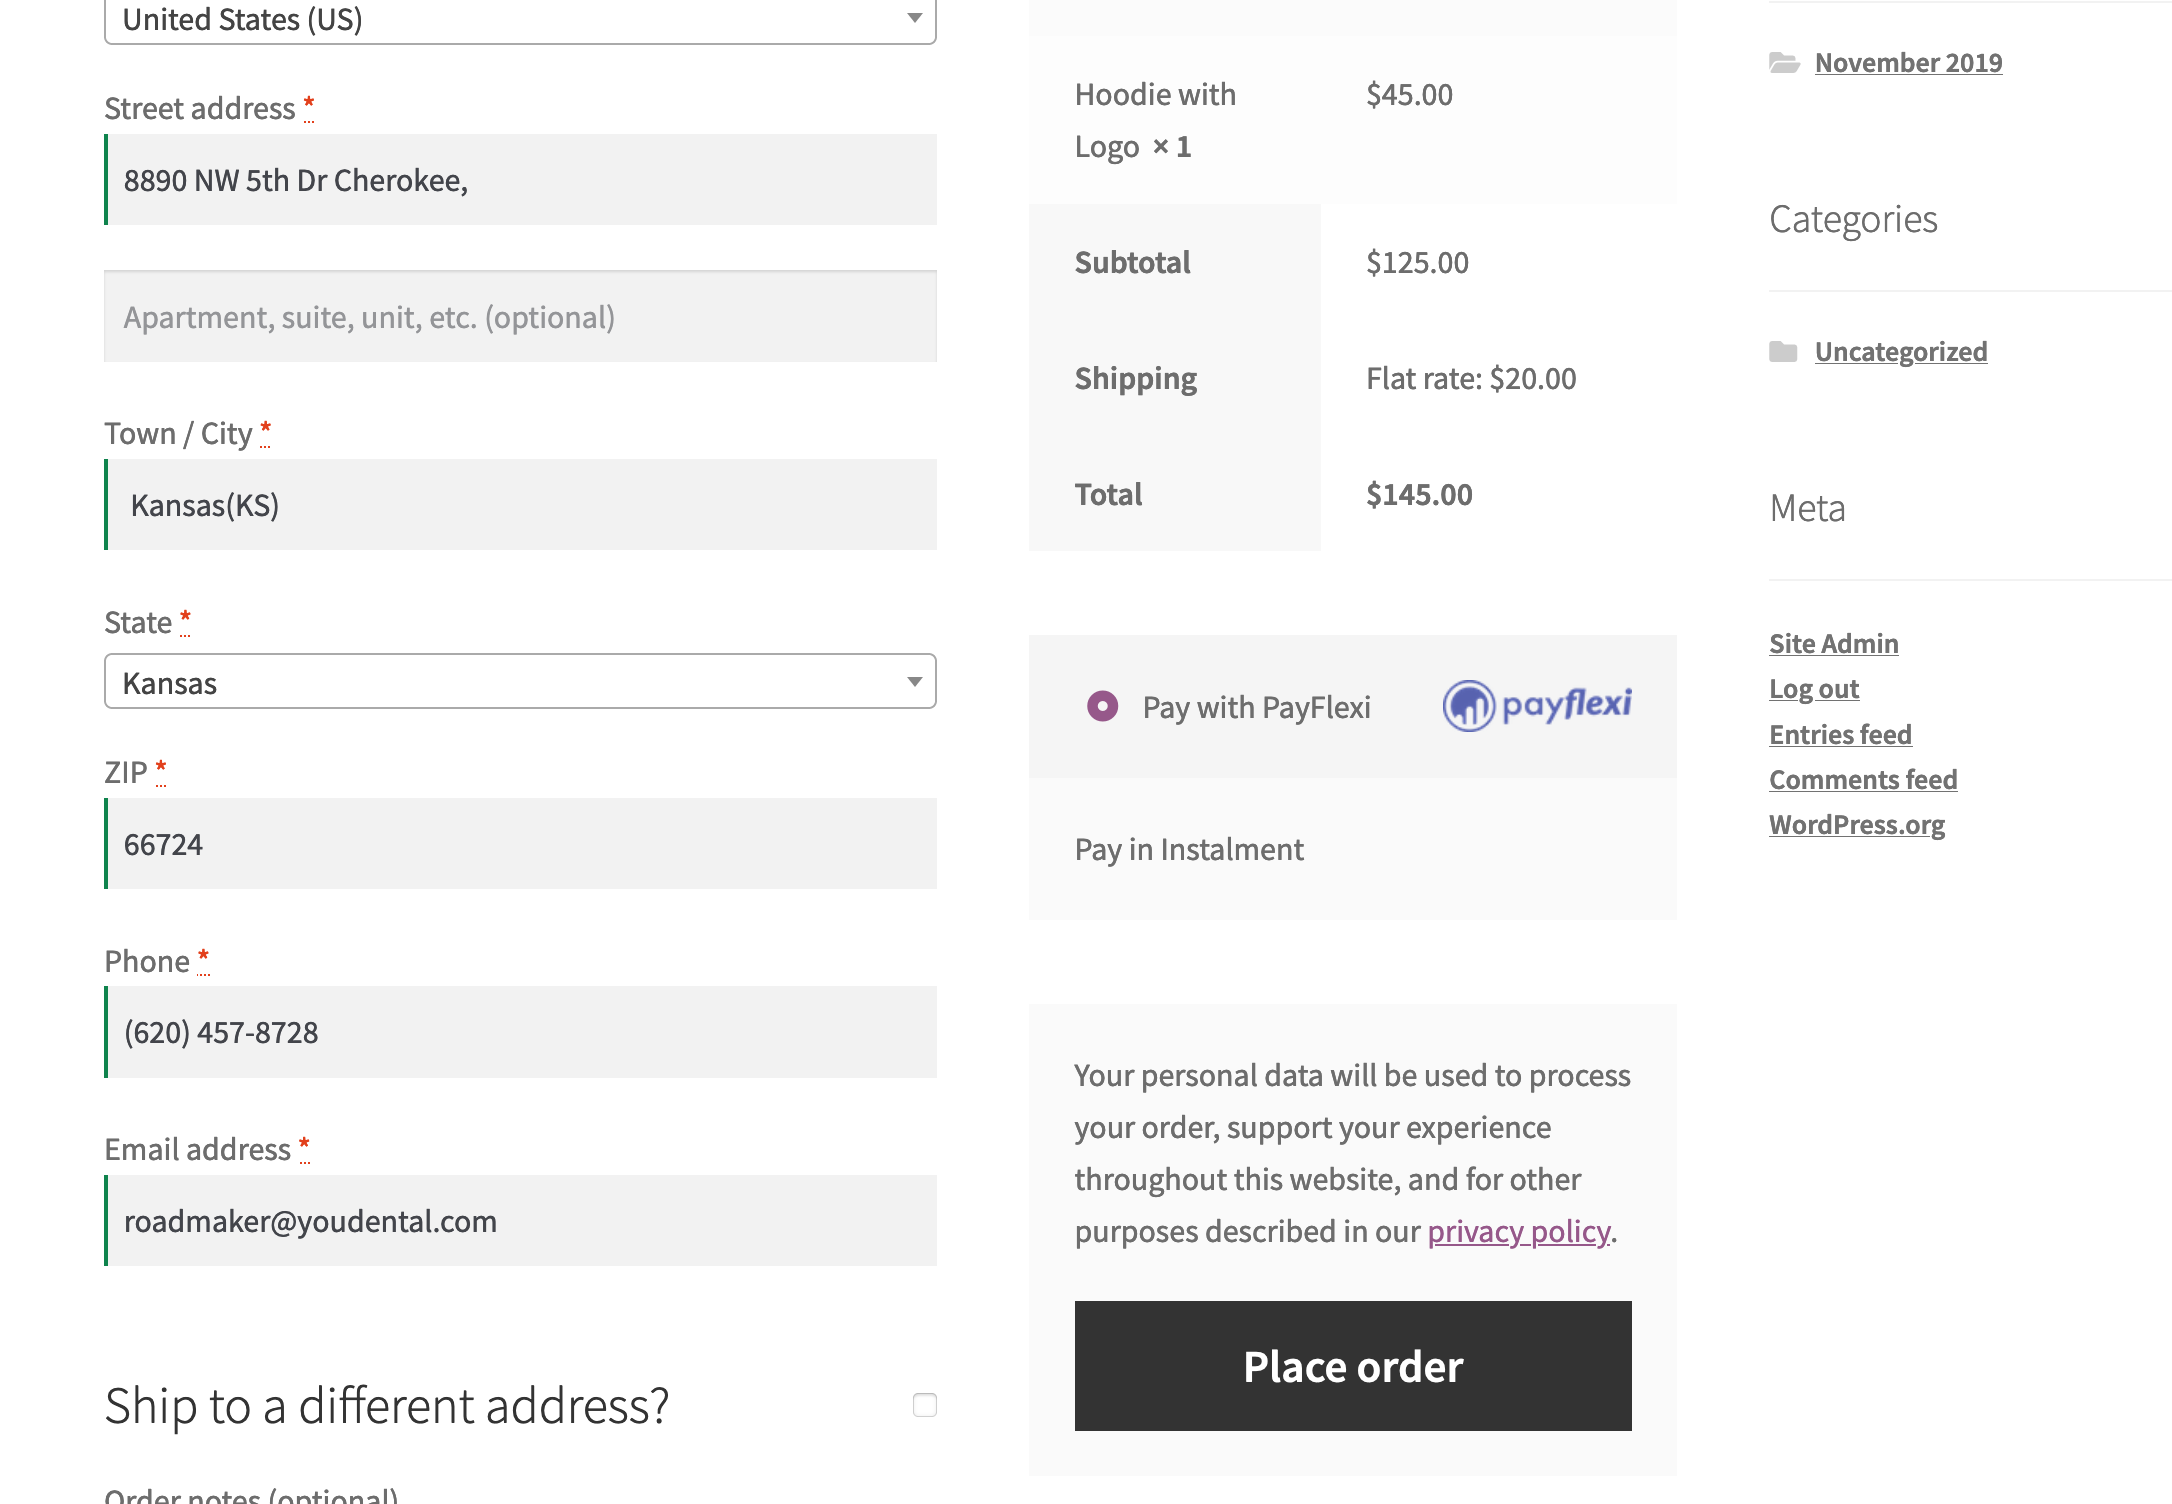 PayFlexi Woocommerce Payment Gateway on the checkout page